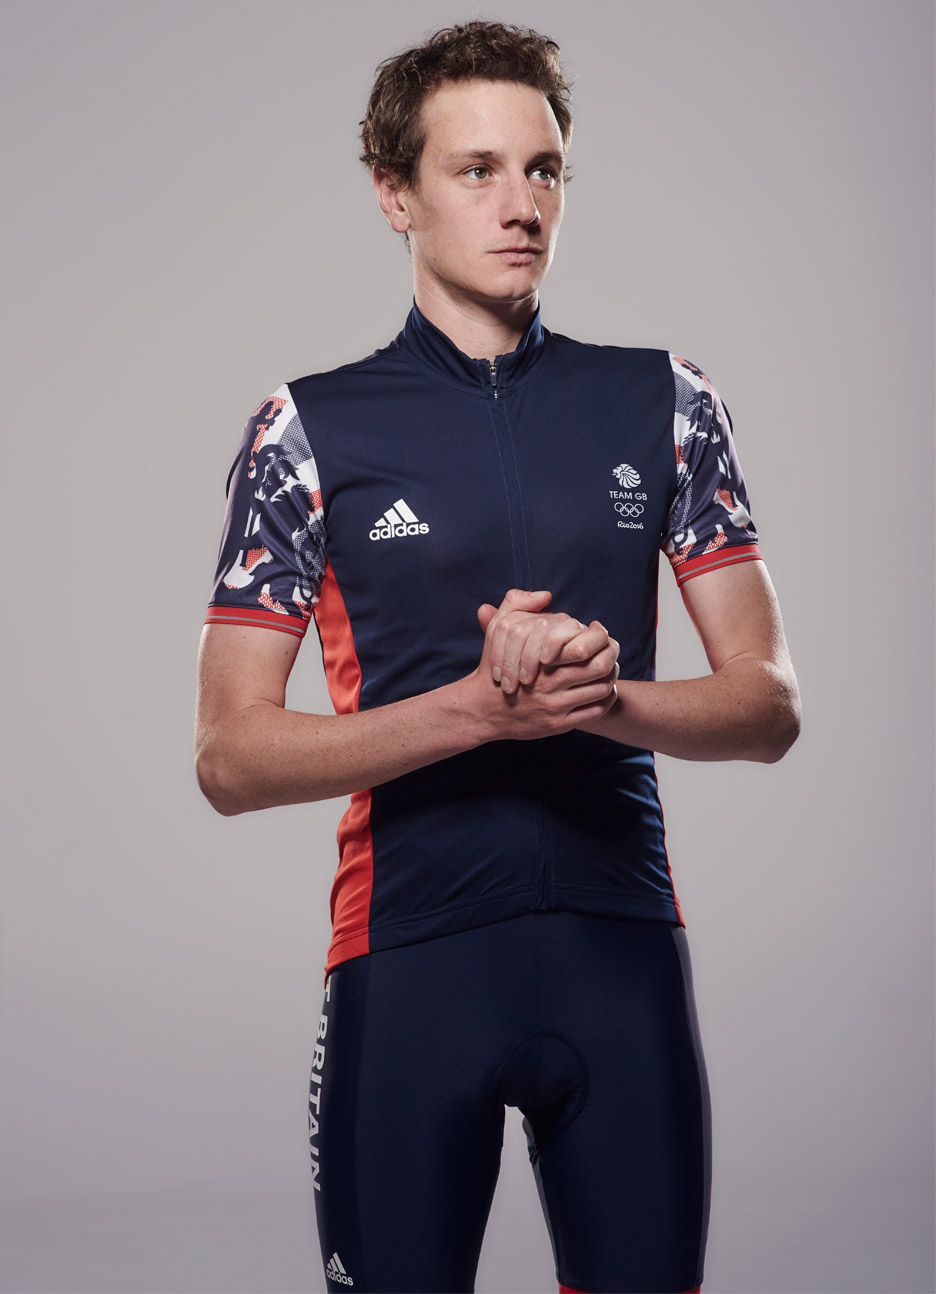 Alistair Brownlee of the famed Brownlee Brothers in Triathlon sporting the new Team GB Kit